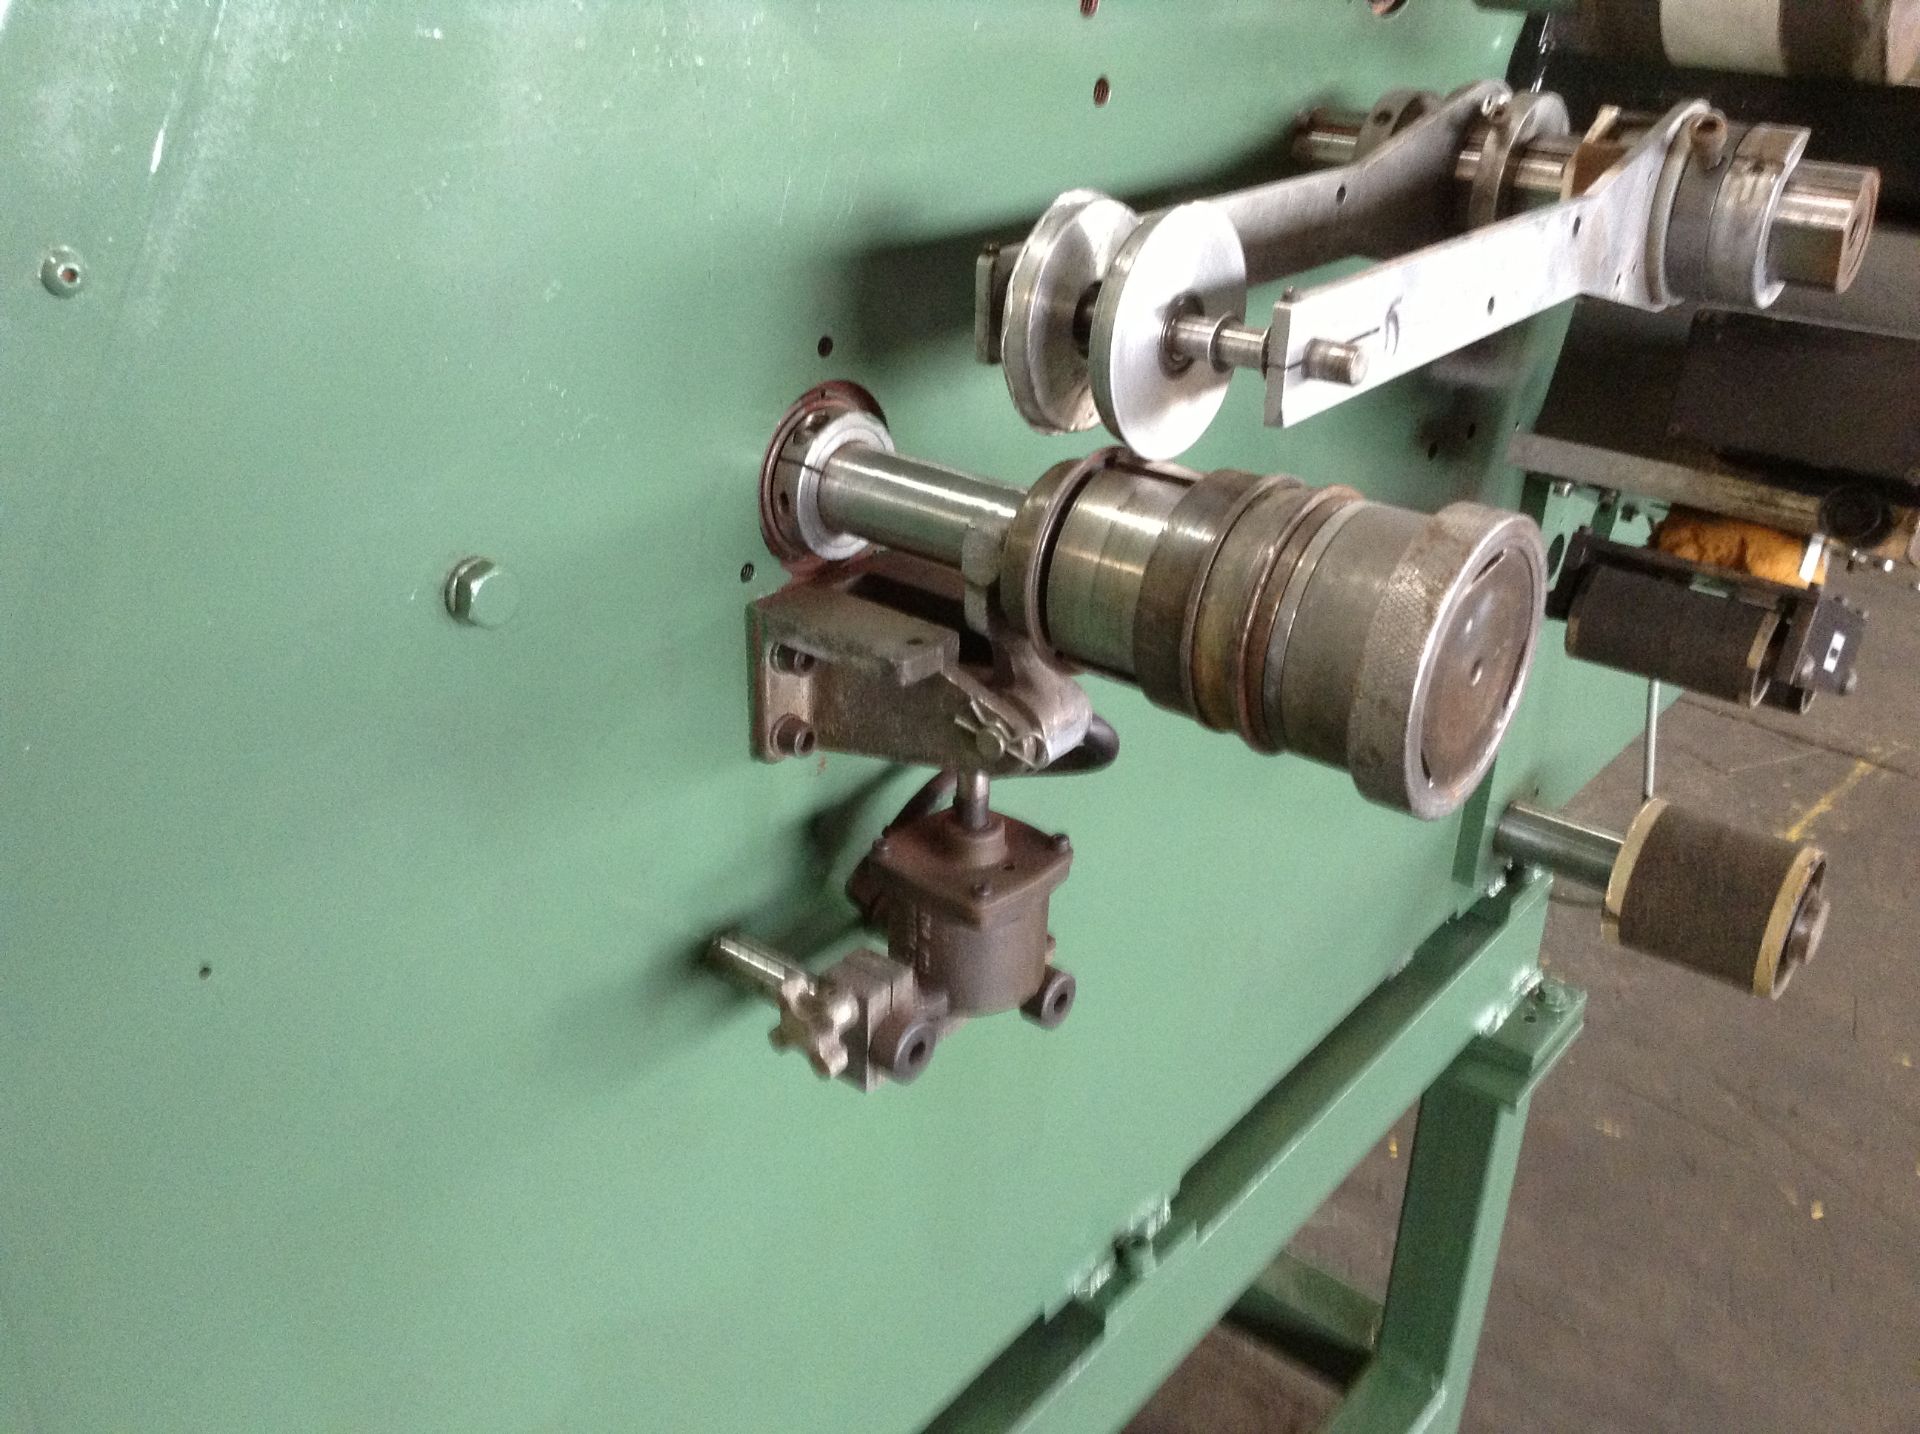 3” Dusenbery Model 794 DH roll doctoring machine. Age 1991. Serial # 22239. Heavy-duty design for - Image 7 of 11